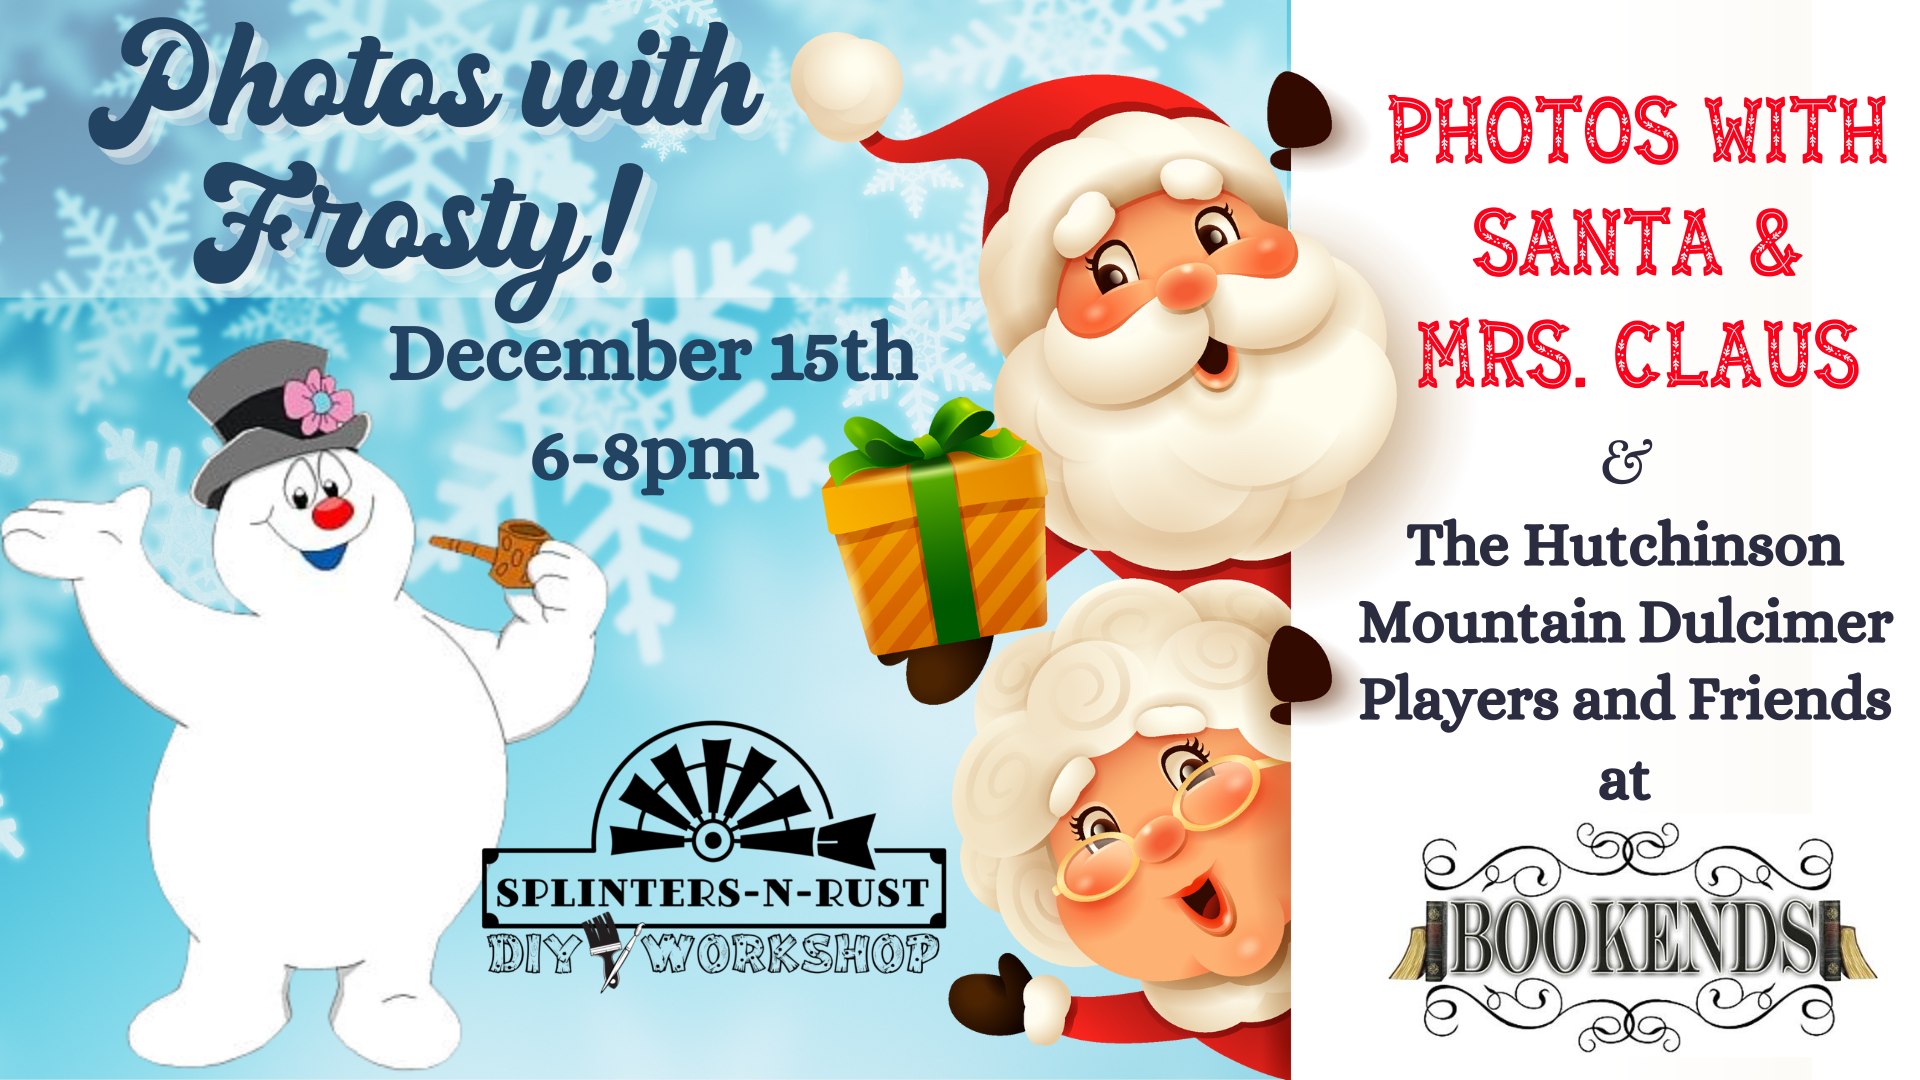 Event Promo Photo For Photos with Santa, Mrs. Clause and Frosty!